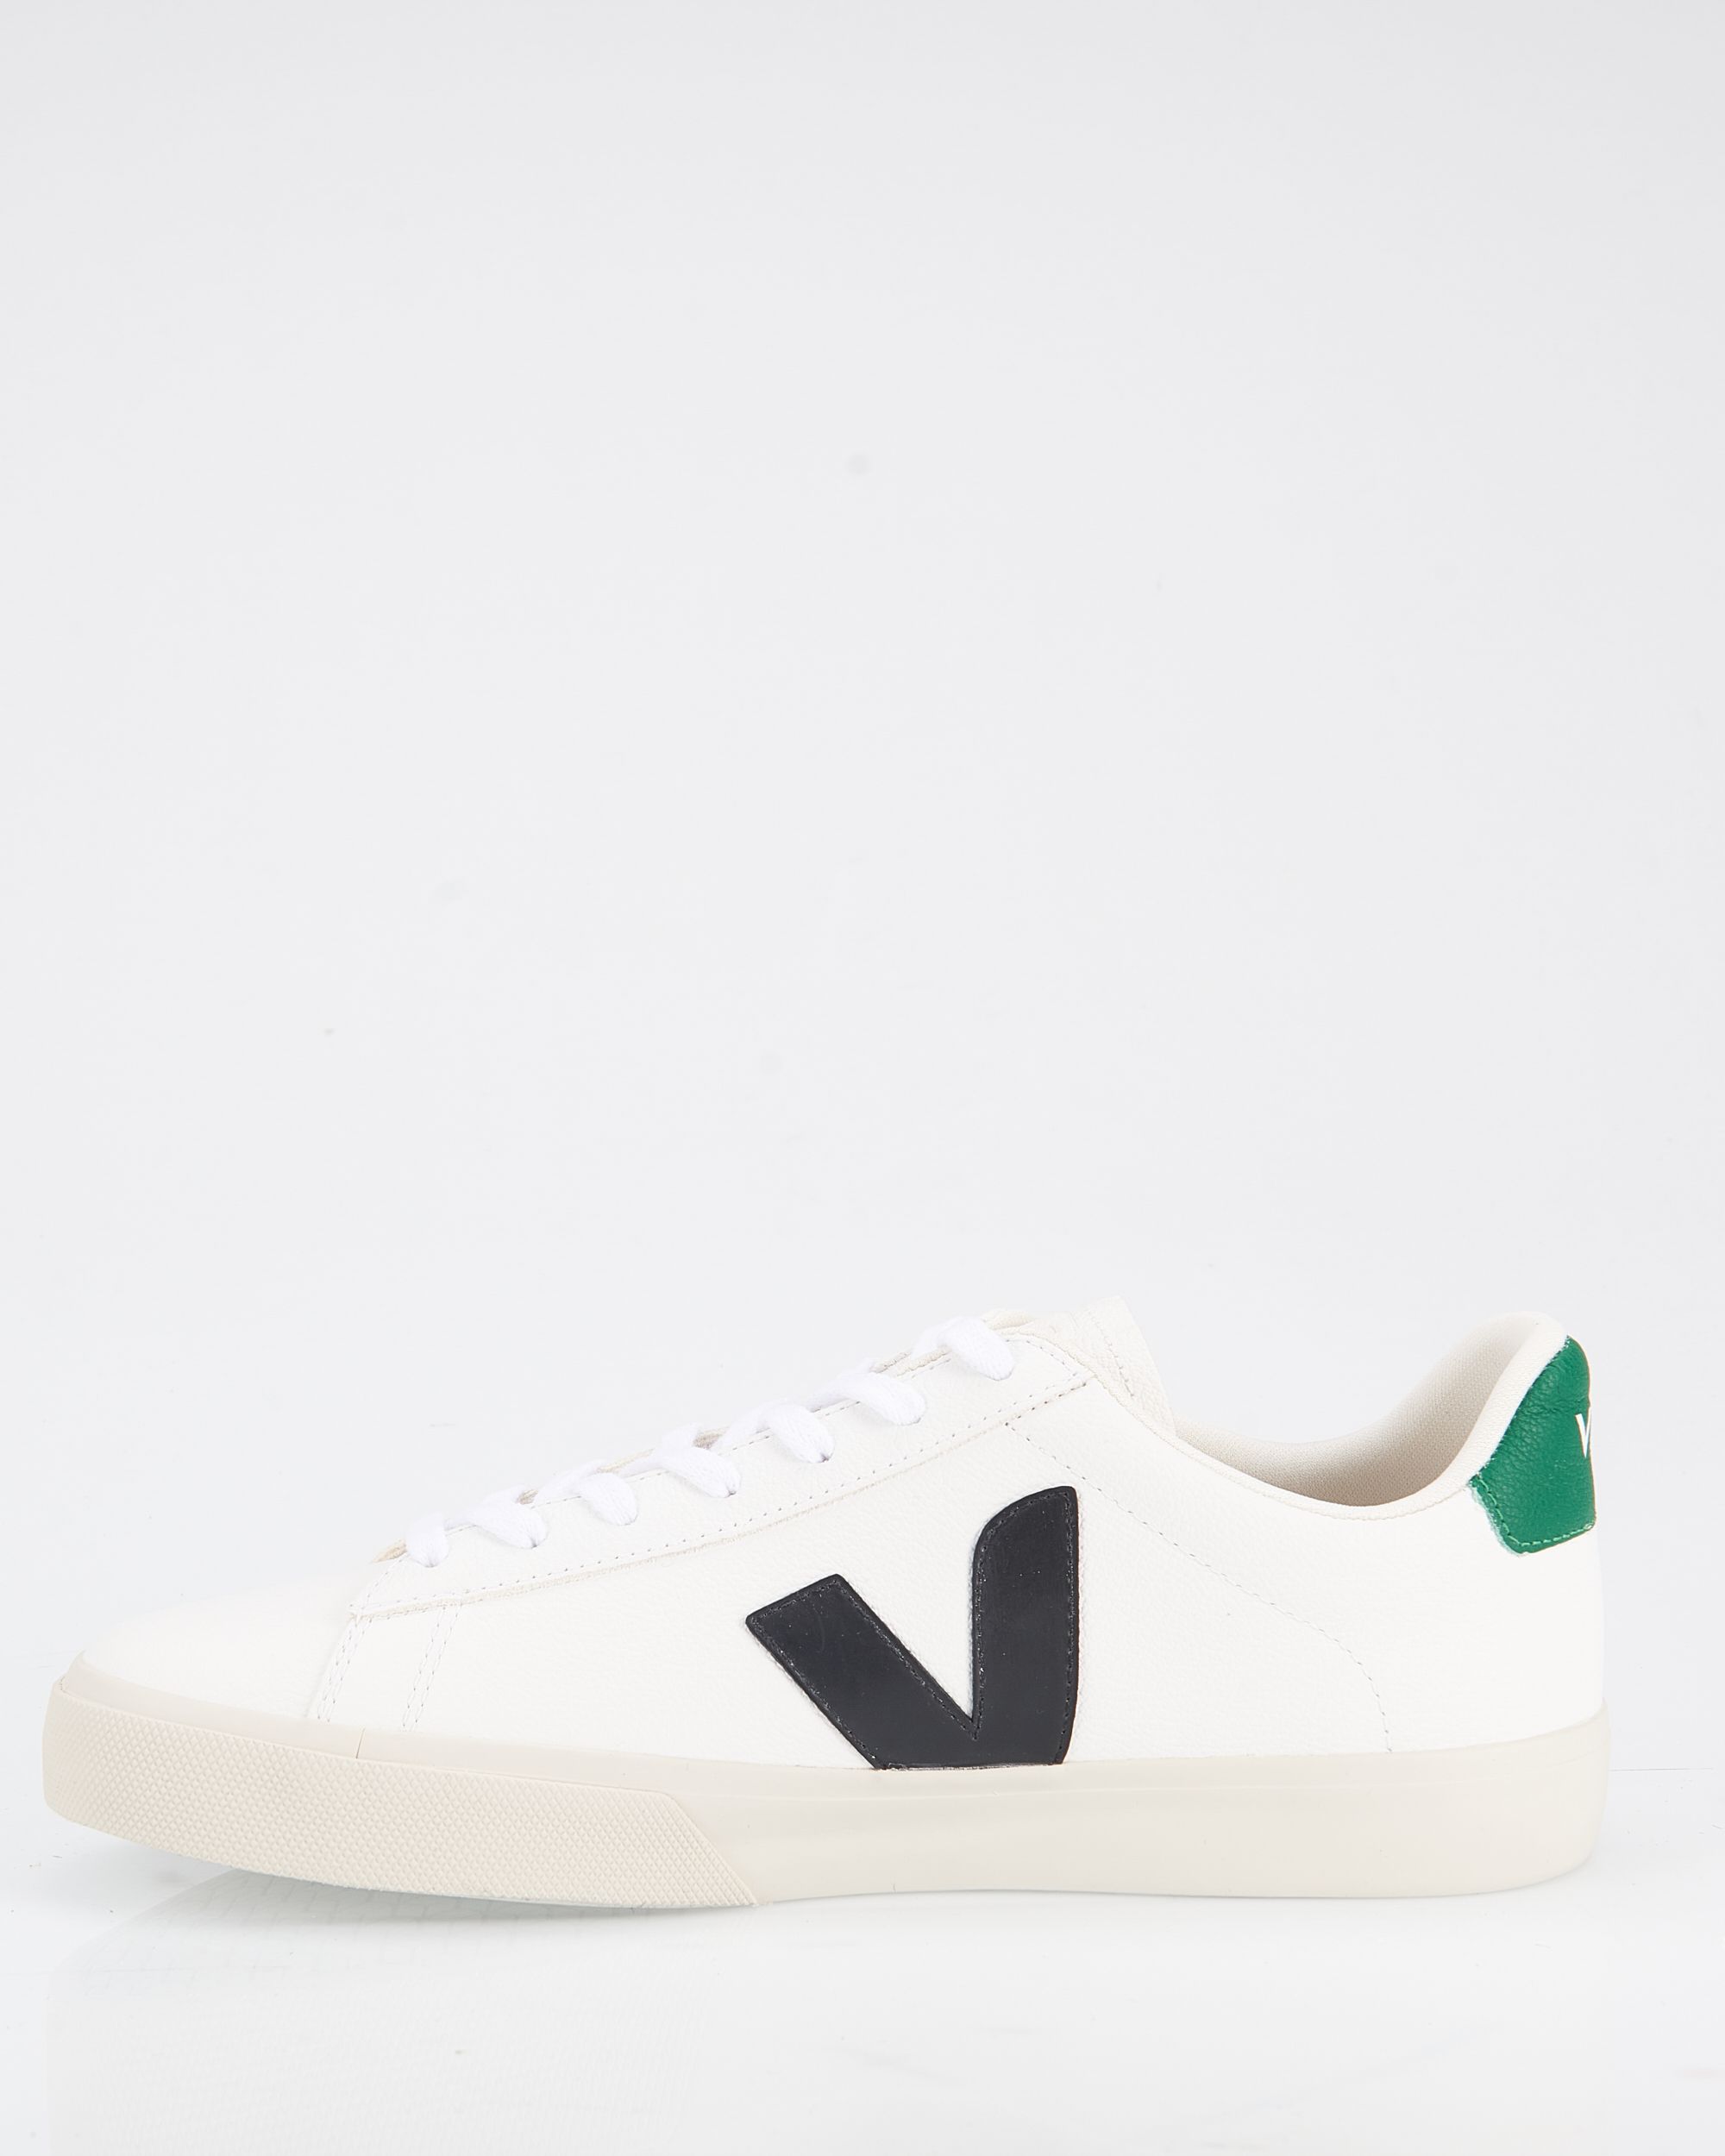 Veja Campo Sneakers Wit 083260-001-41